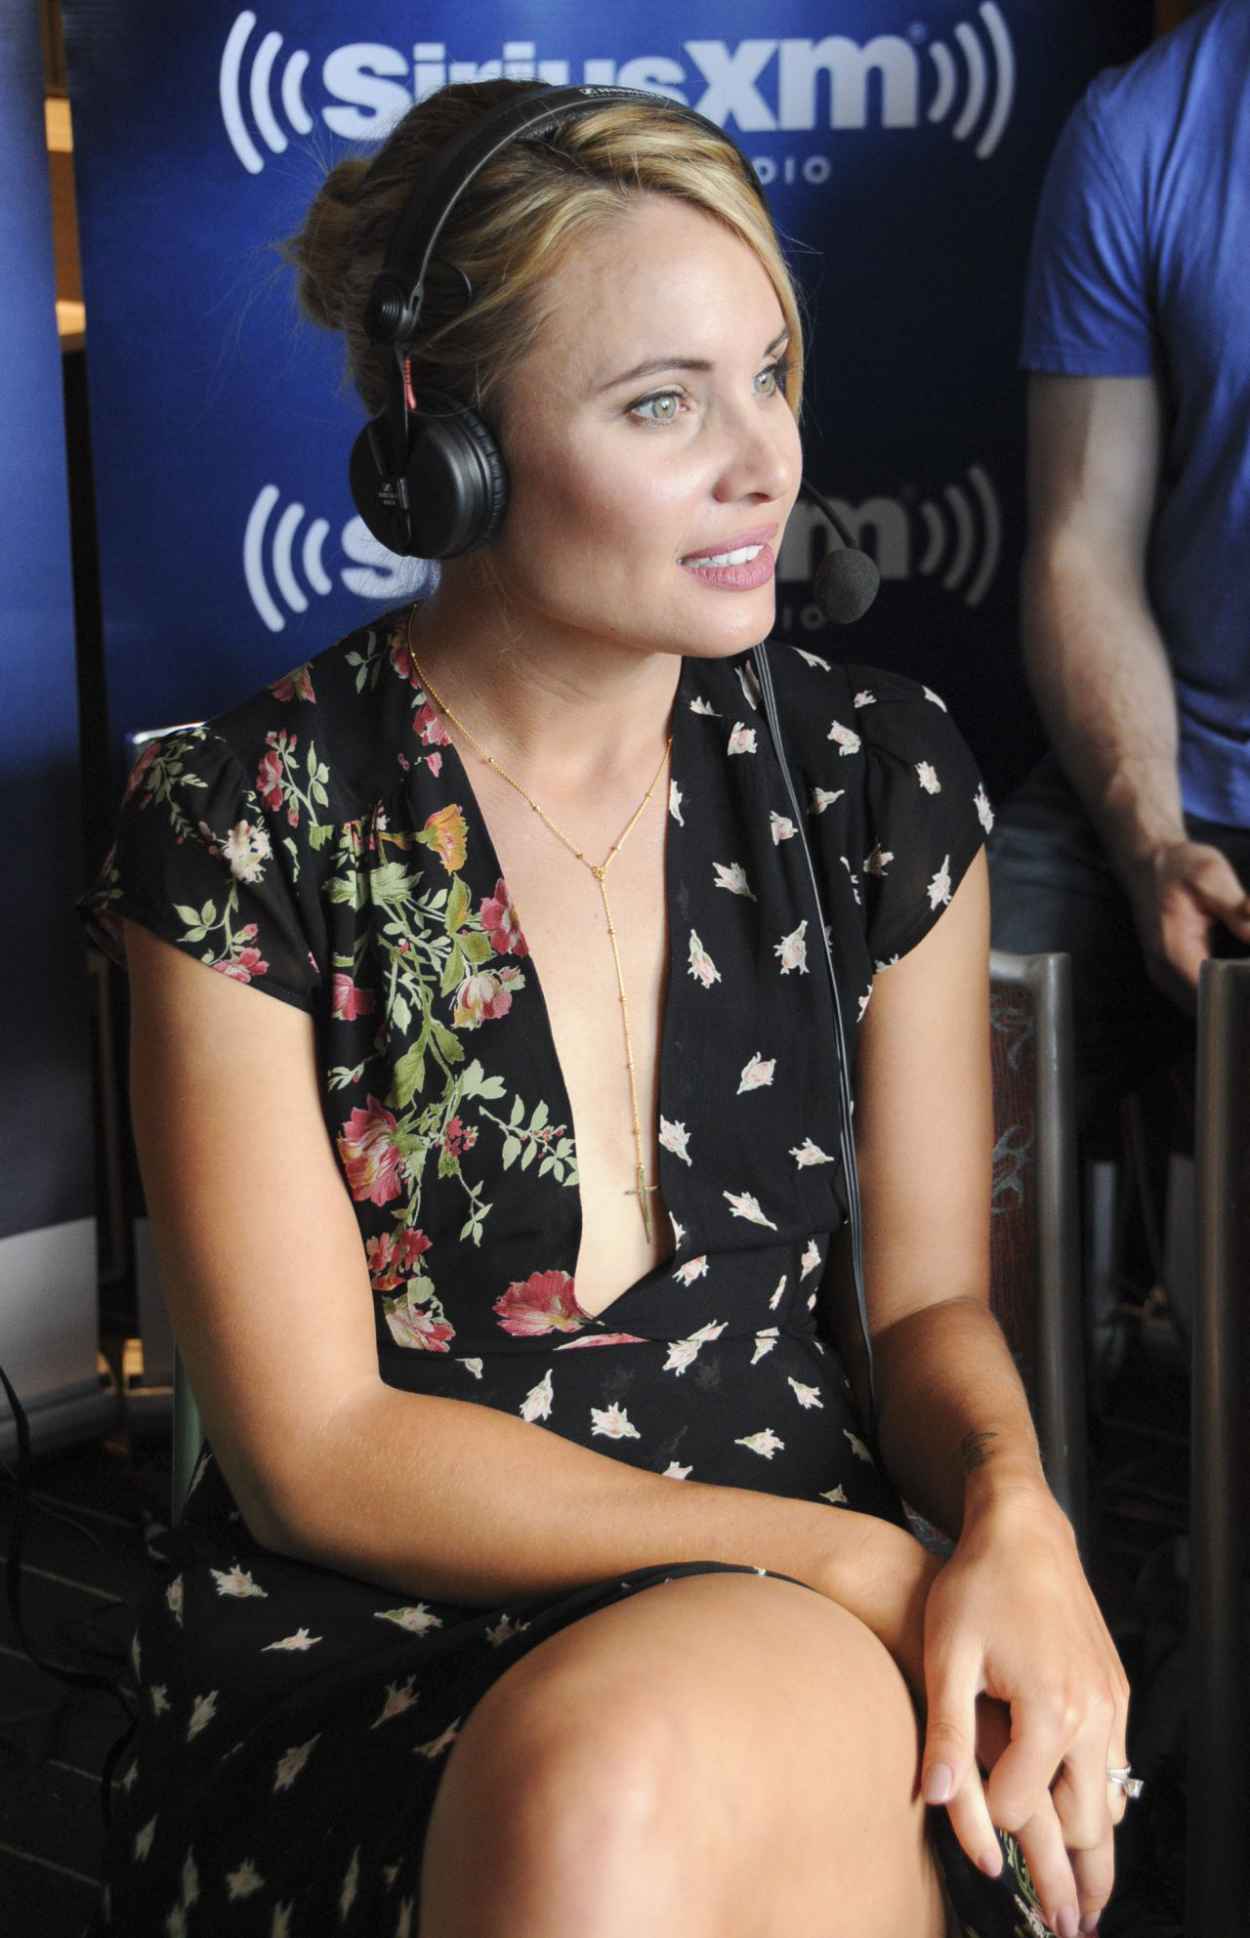 Leah Pipes Siriusxms Ew Radio Channel Broadcasts From Comic Con In